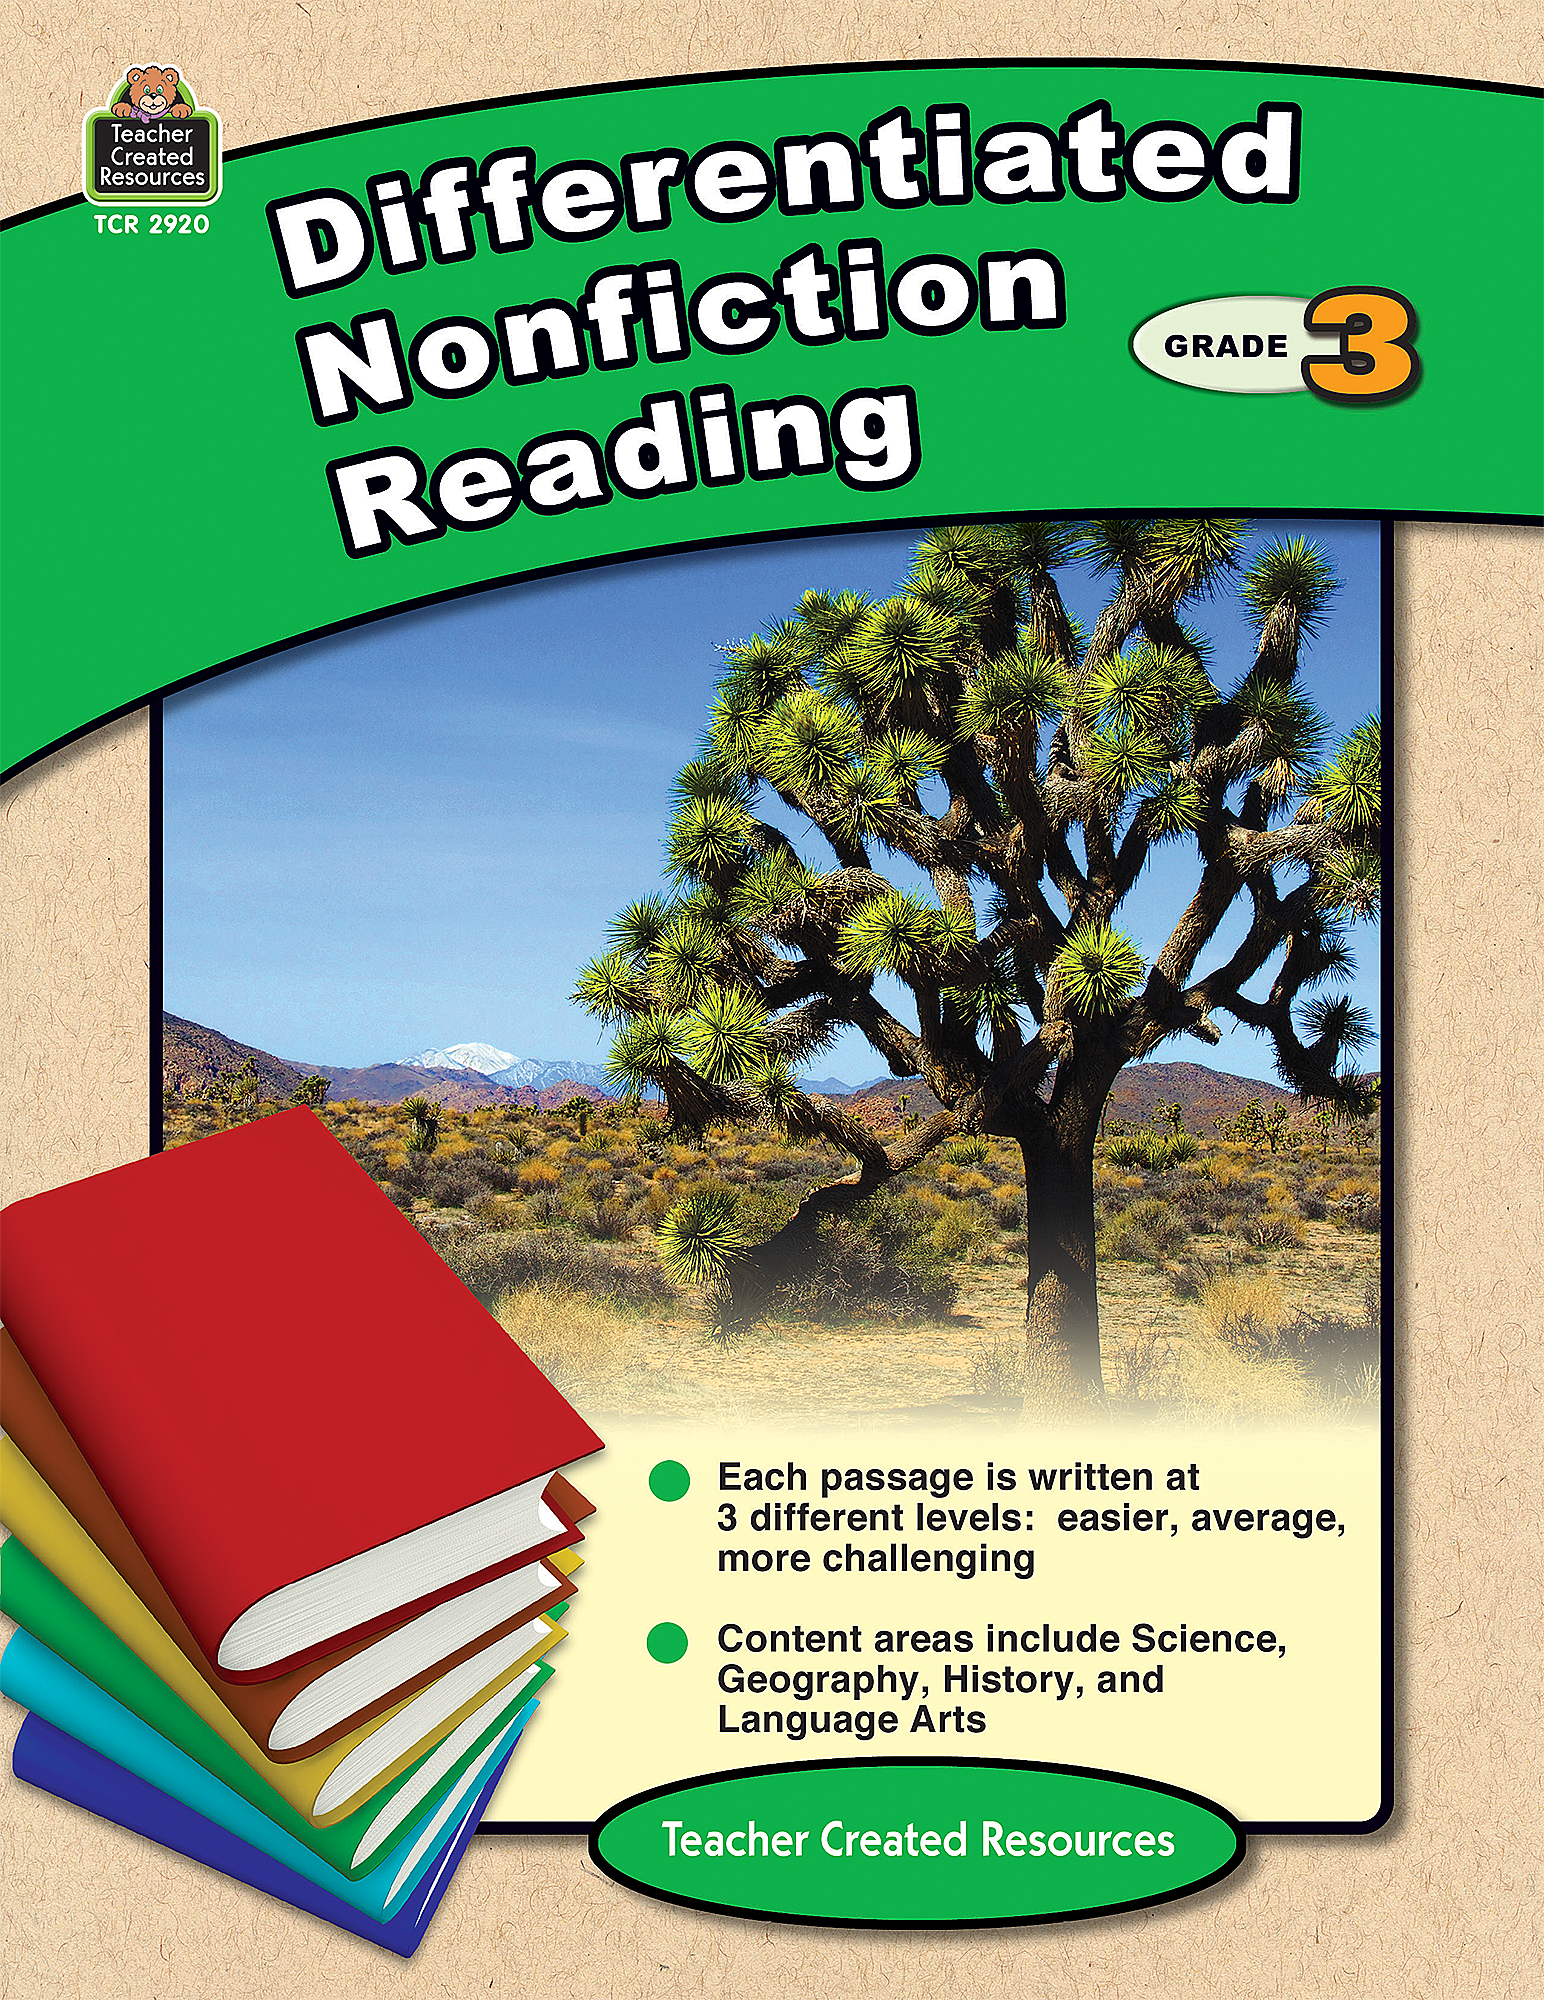 Differentiated Nonfiction Reading Grade 3 - TCR2920 | Teacher Created